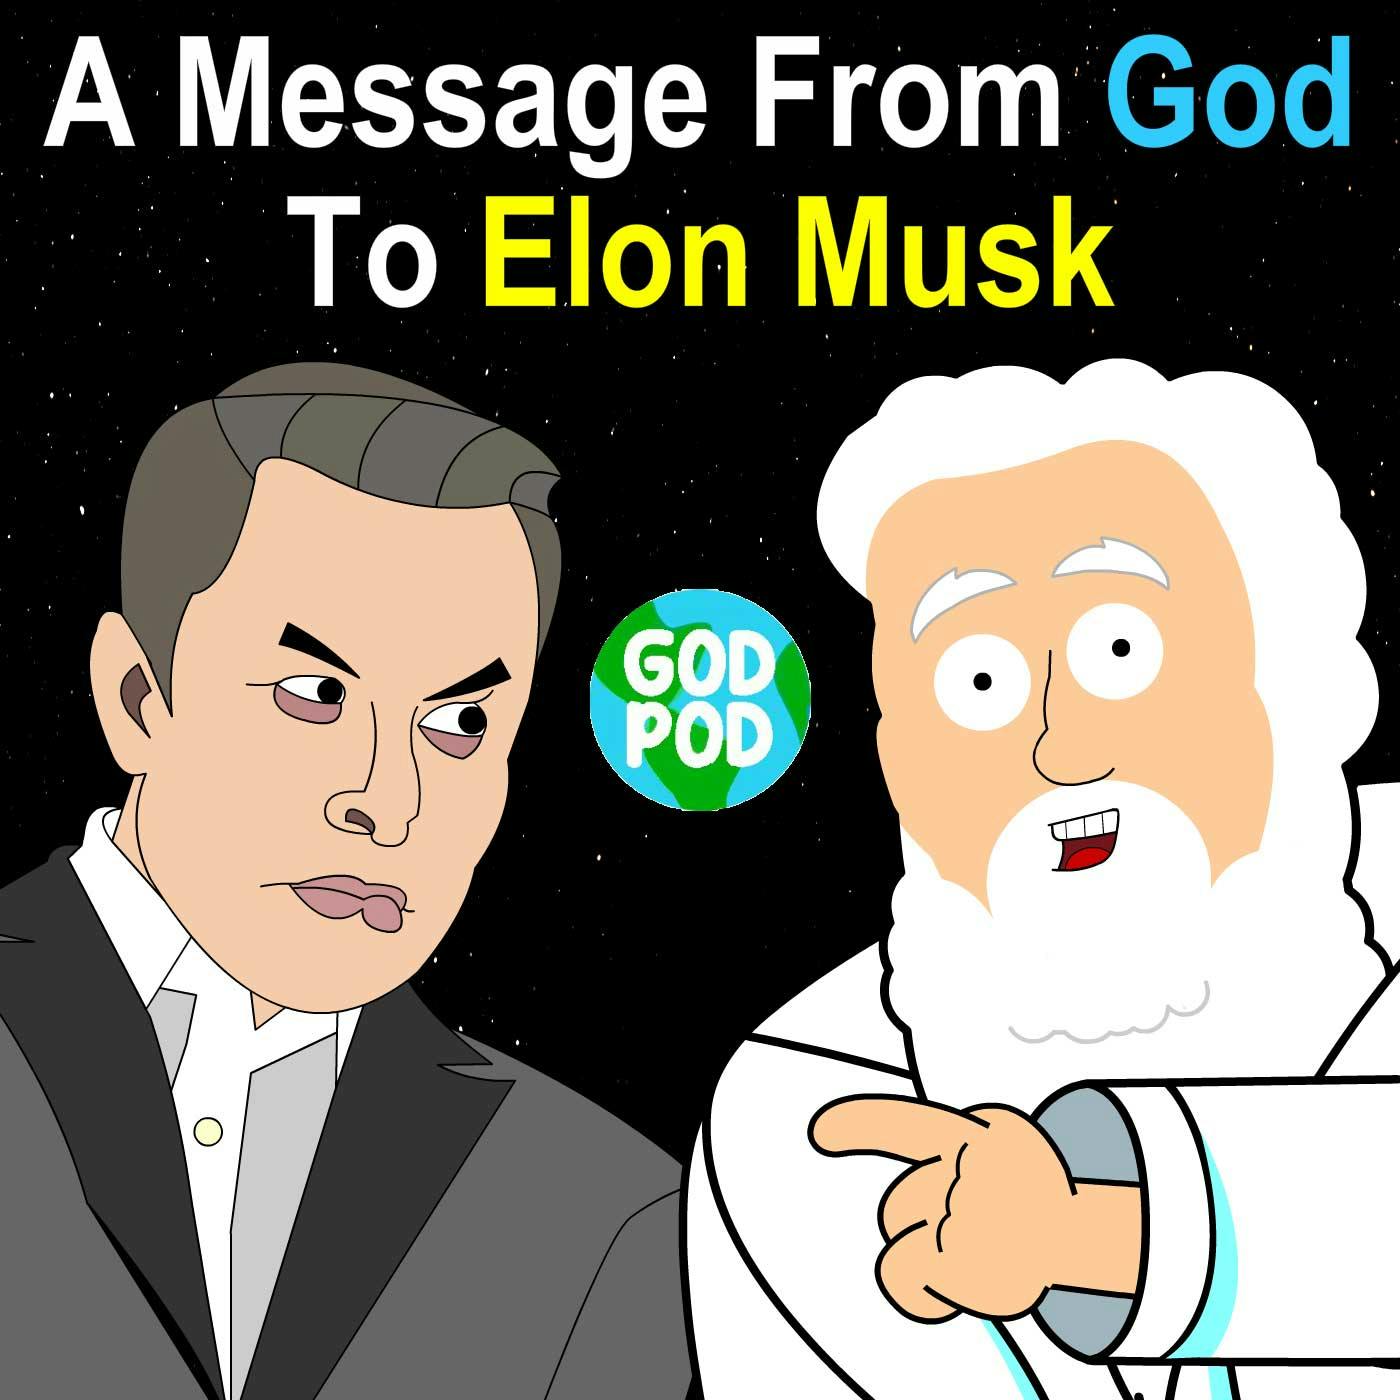 A Message From God To Elon Musk